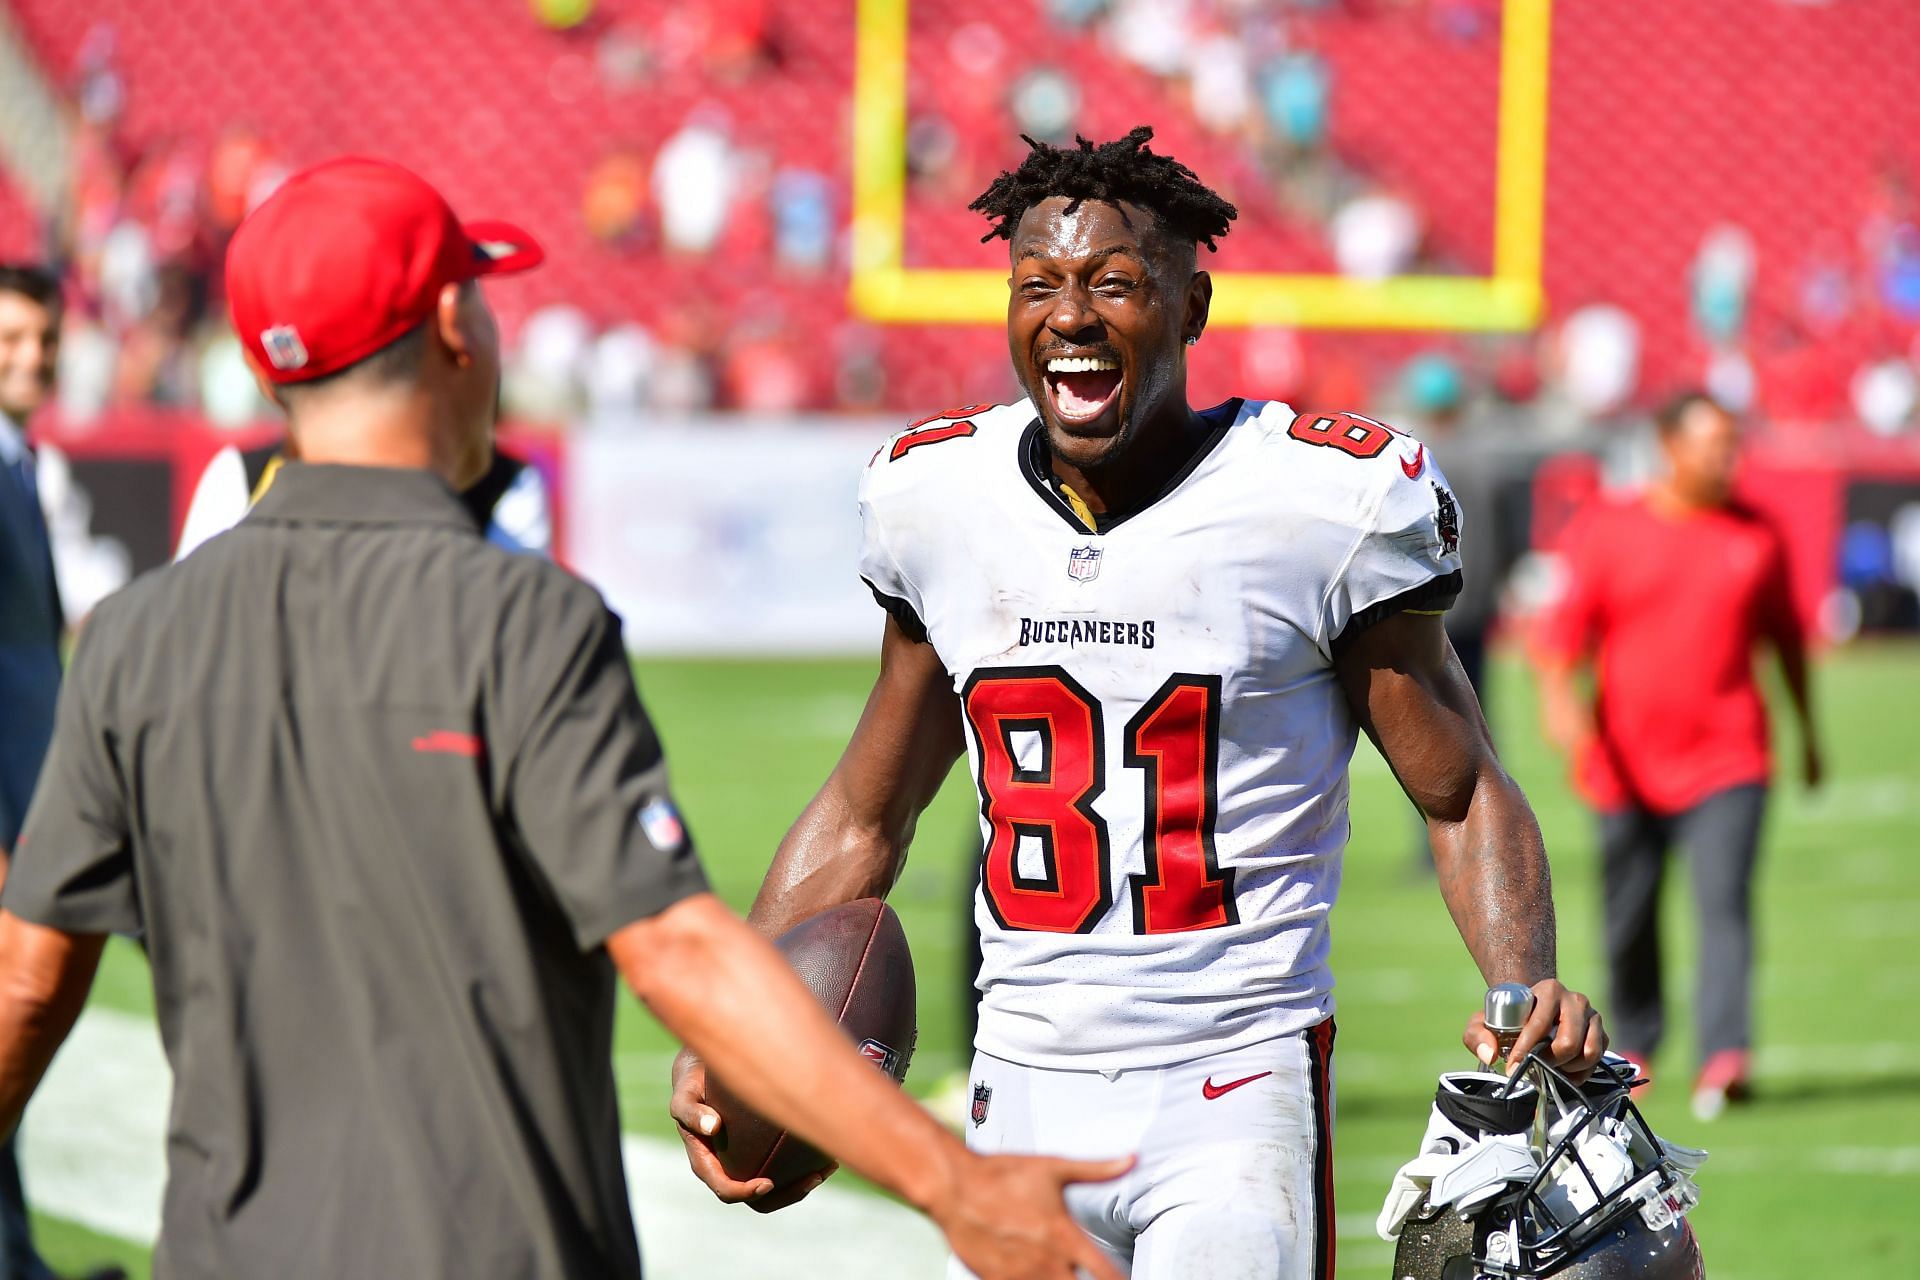 Buccaneers receiver Antonio Brown is back with the team